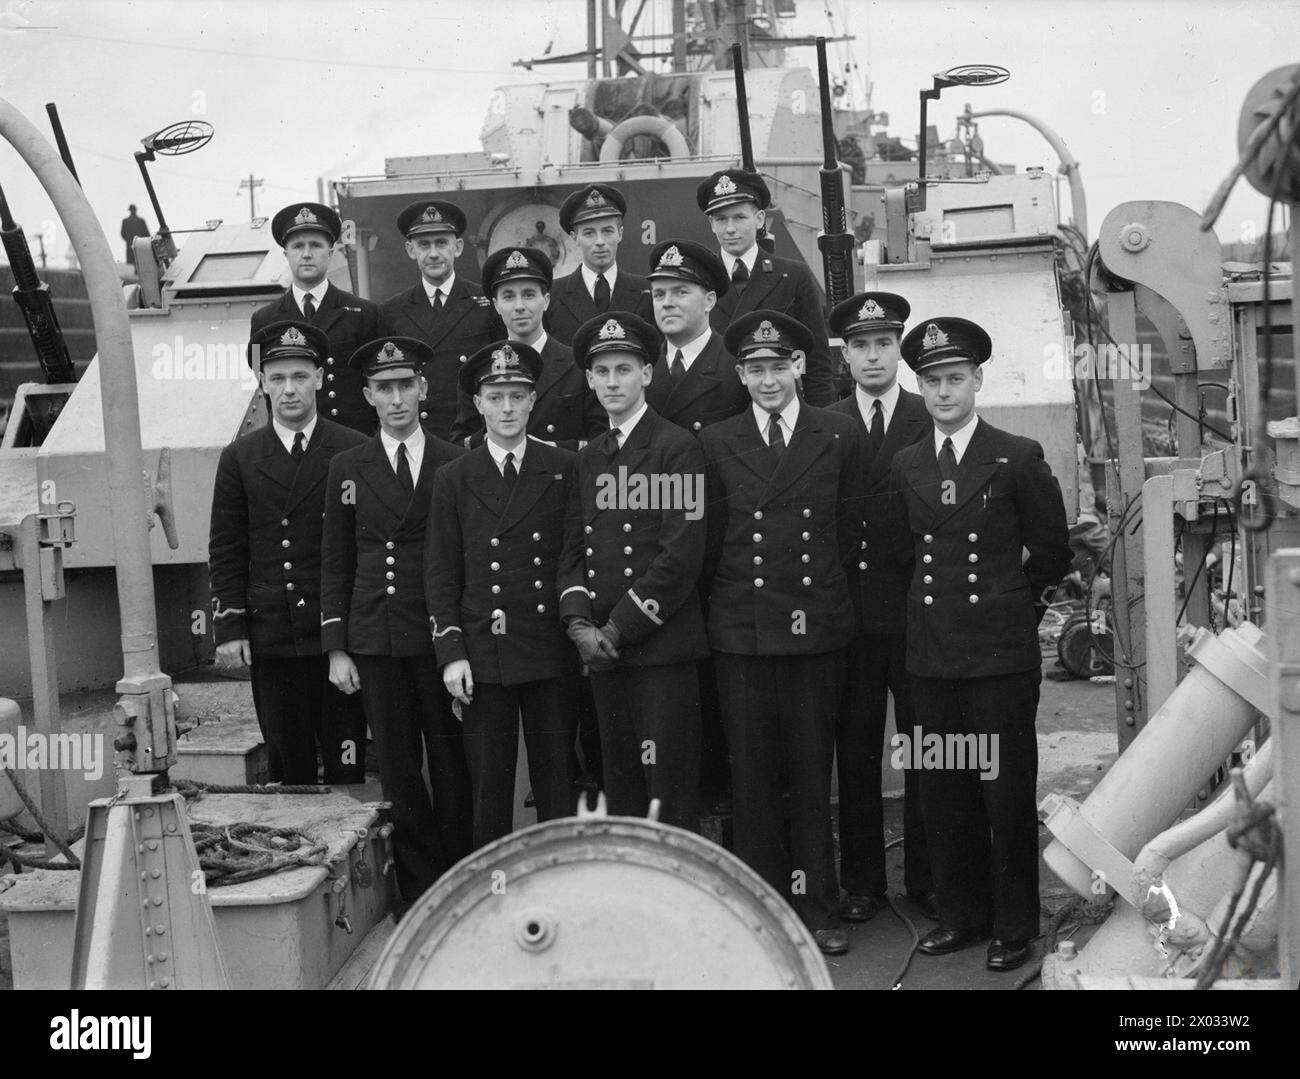 ATLANTIC RECORD BREAKERS WELCOMED HOME. 6 AND 7 MARCH 1944, LIVERPOOL, IN HMS WILD GOOSE. THE 2ND ESCORT GROUP WAS WELCOMED HOME AFTER ITS RECORD BREAKING U-BOAT HUNT IN THE NORTH ATLANTIC IN WHICH IT 'KILLED' 6 ENEMY SUBMARINES. HM SLOOP HMS WILD GOOSE WAS PART OF THE ESCORT GROUP. - Officers of the WILD GOOSE. Left to right: Back row: Lieut J Evans, DSC, RNVR, of Birmingham; Lieut Cdr D E G Wemyss, DSC and bar, RN, of Saltash and Fife; Lieut W P Chipman, RCNVR, of Ottawa; and Midshipman J W F H Dickis, RNR, of Nottingham. Centre: Surg Lieut G T Stewart, RNVR, of Elderslie; and Warrant Engine Stock Photo